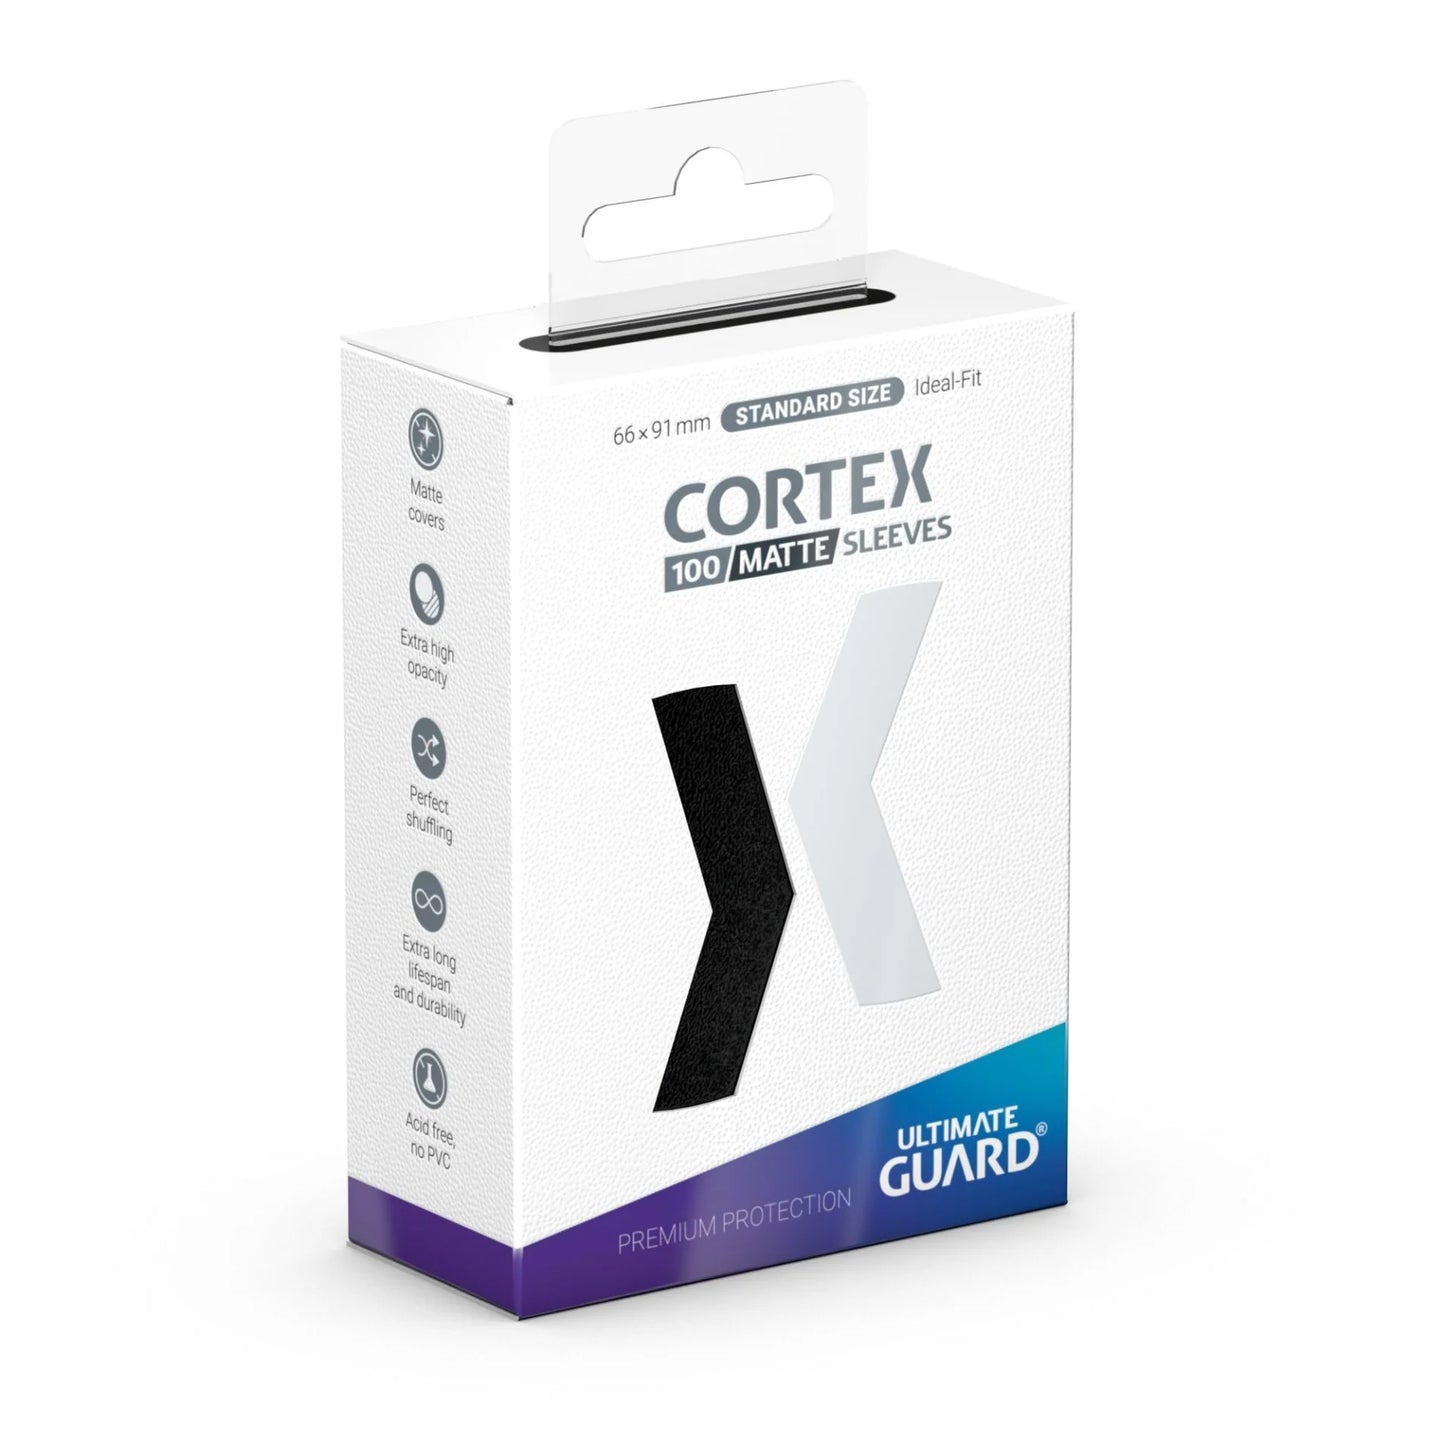 Ultimate guard - cortex sleeves - standard size - 100ct matte - various colours